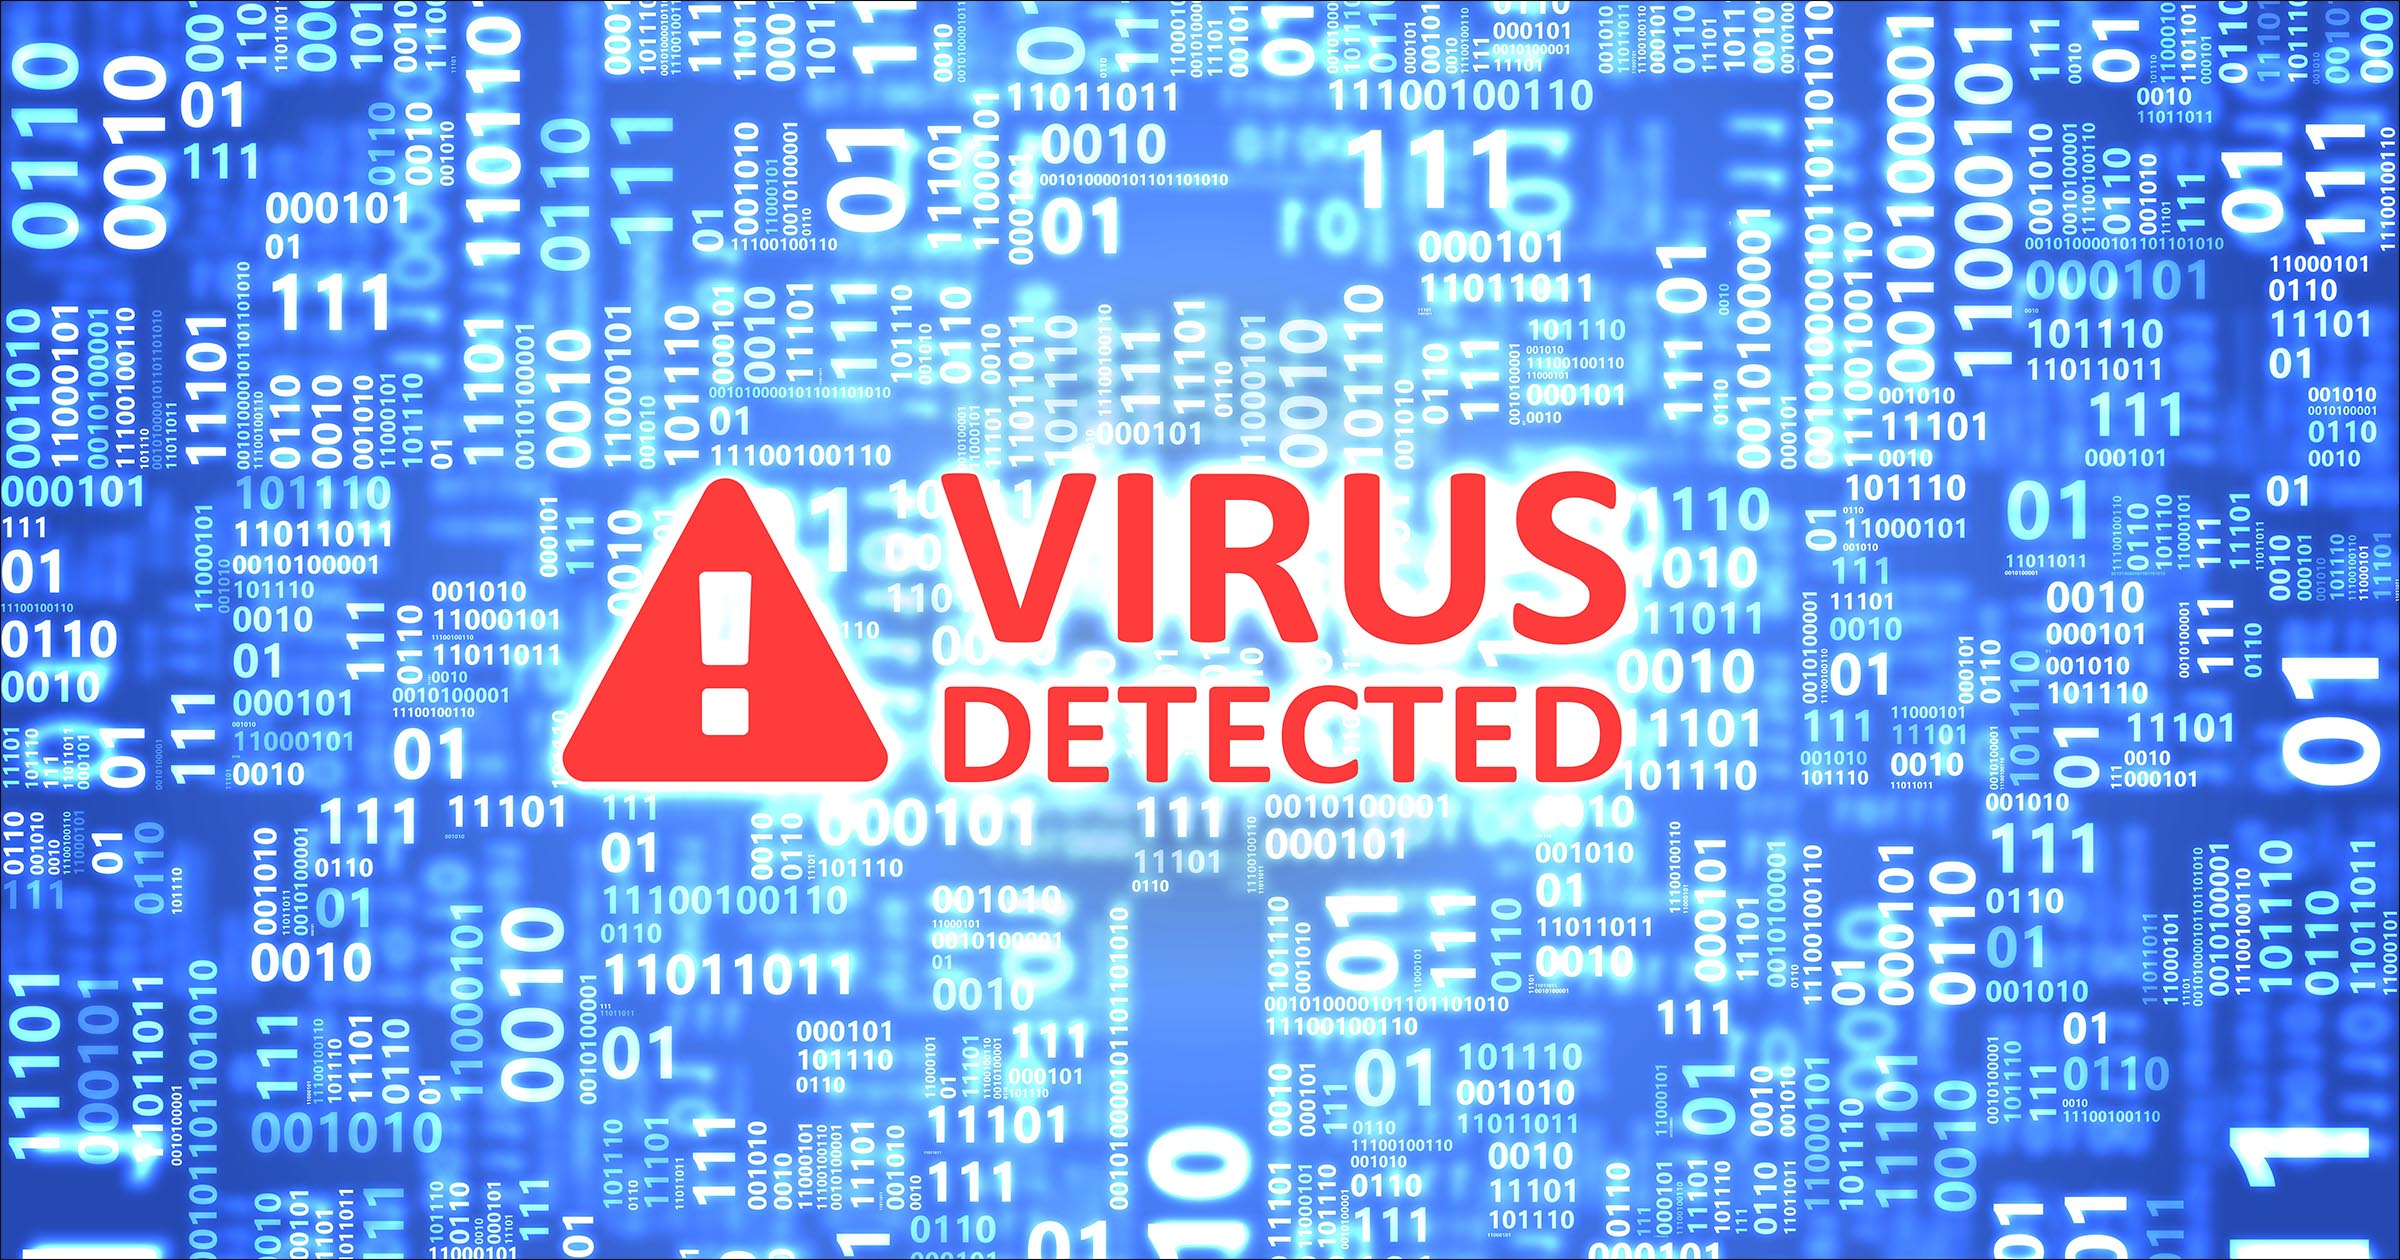 Download and install a reliable antimalware program.
Run a full system scan to detect and remove any malware or viruses that may be causing the error.